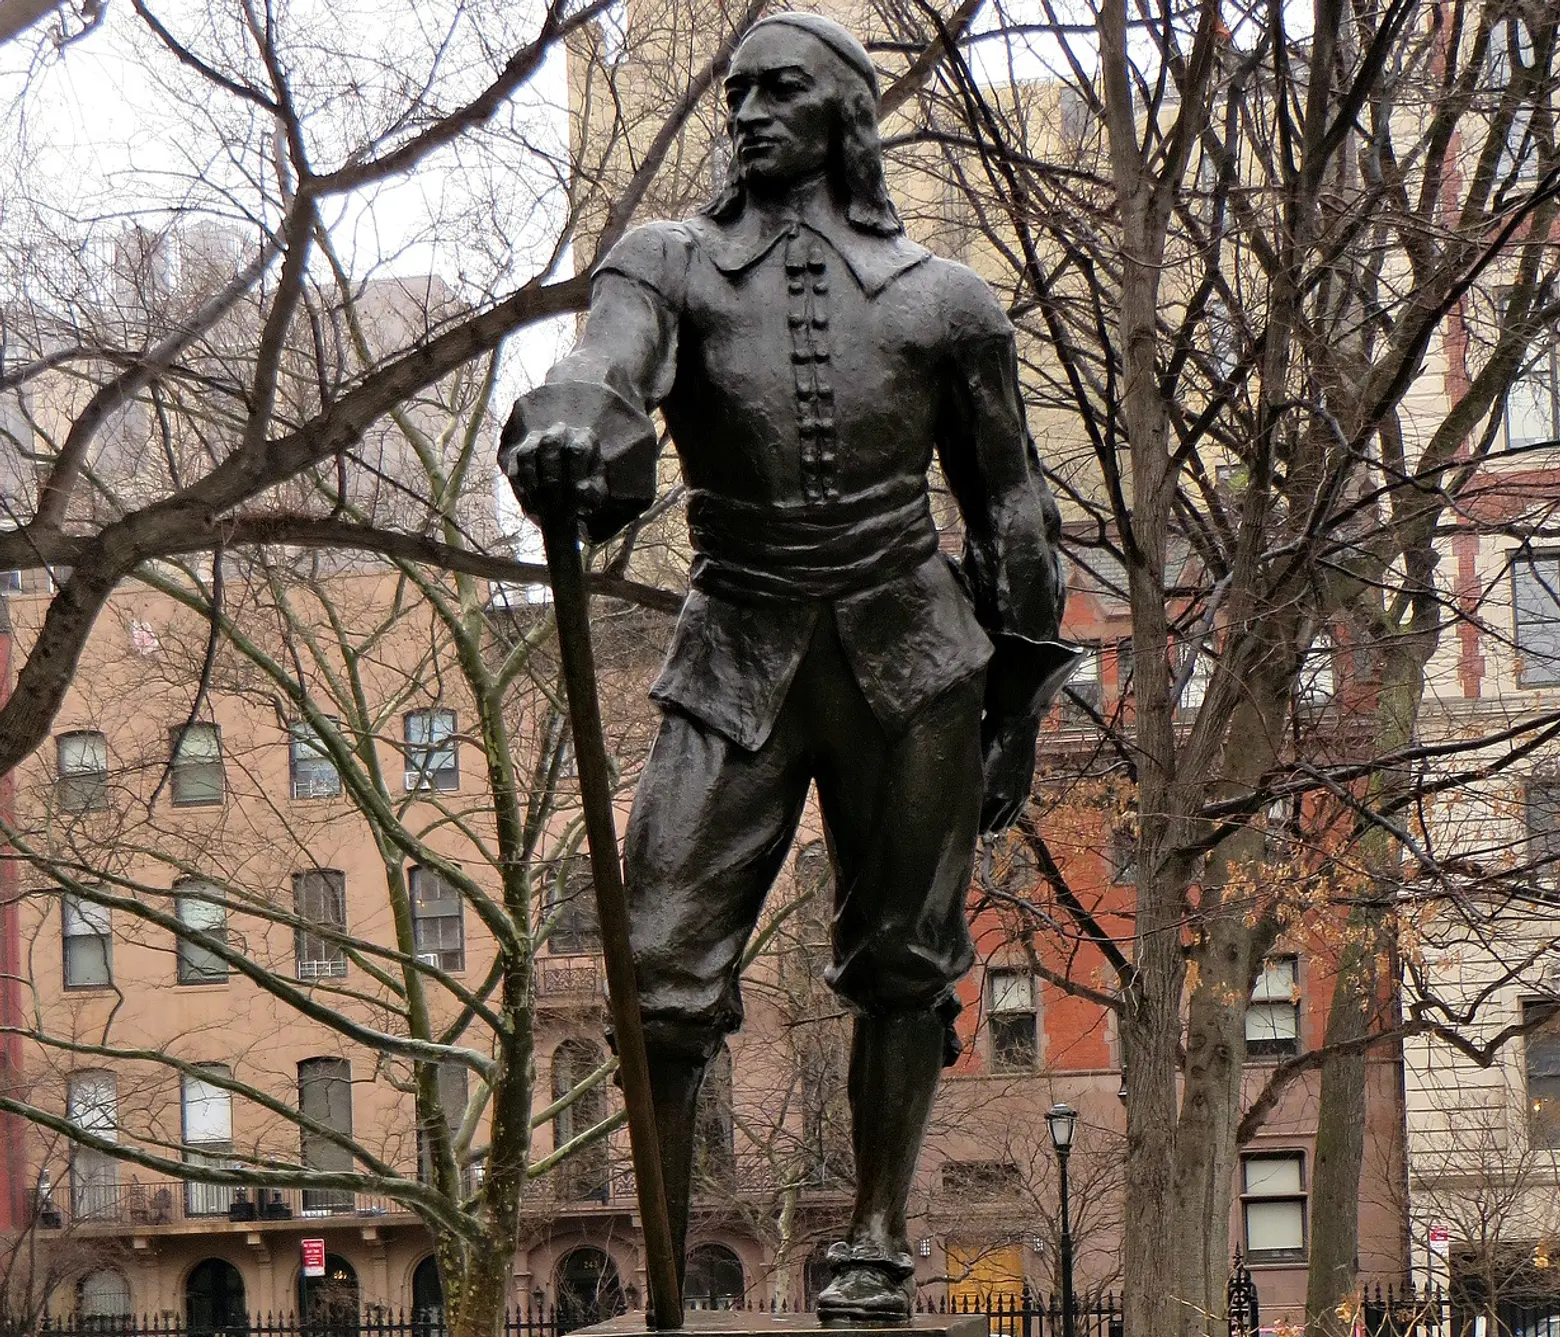 Jewish rights group wants Peter Stuyvesant monuments removed over anti-semitism